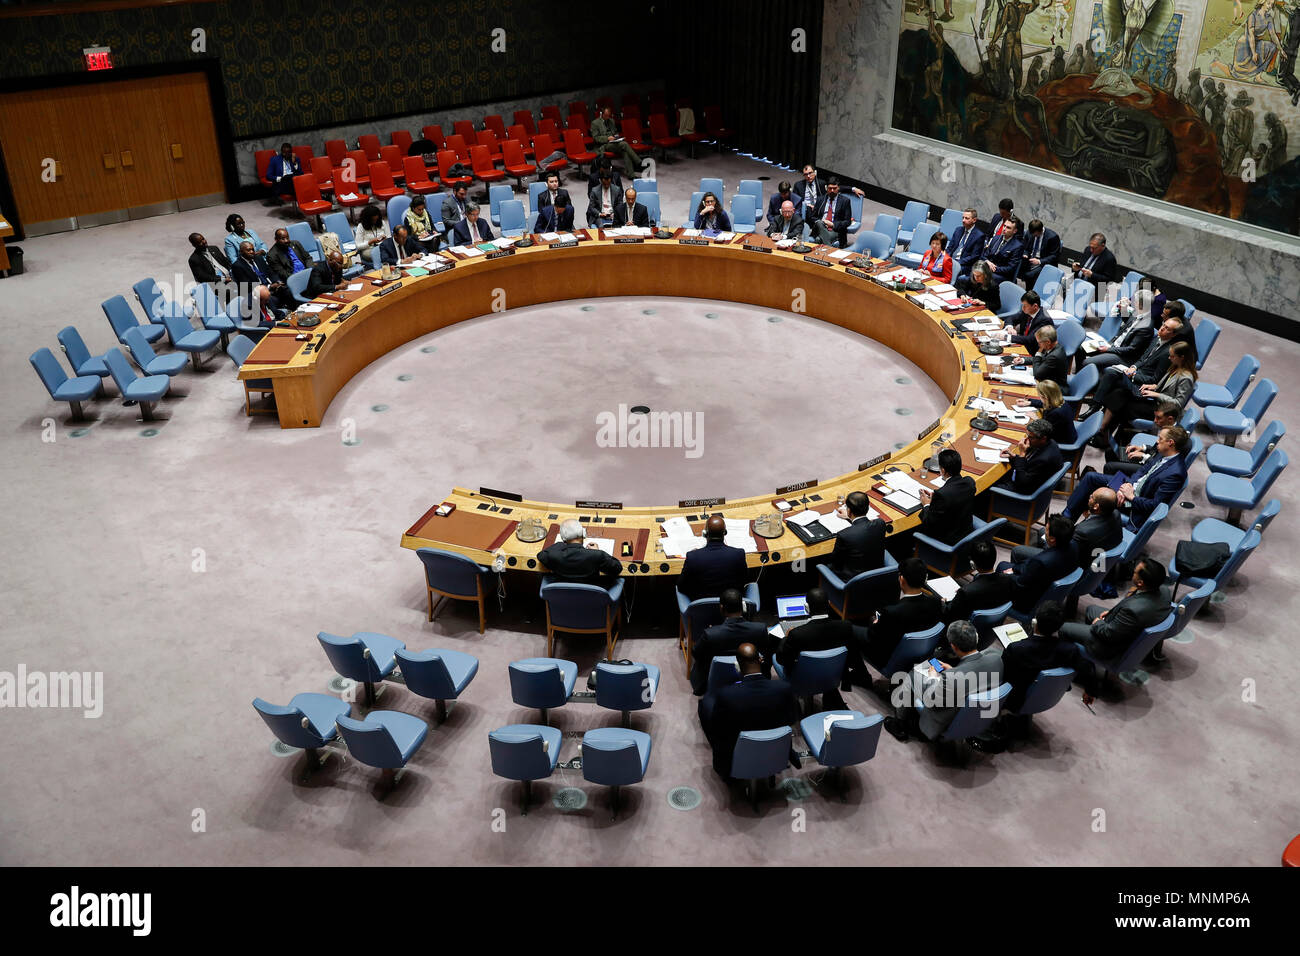 United Nations. 17th May, 2018. Photo taken on May 17, 2018 shows the scene of the United Nations (UN) Security Council high-level open debate on upholding international law for world peace and security, at the UN headquarters in New York. While concerns about the authority and mandated duties of the UN Security Council were raised at a high-level open debate on Thursday, China threw its considerable weight behind it, one of the six UN principal organs for maintaining international peace and security. Credit: Li Muzi/Xinhua/Alamy Live News Stock Photo